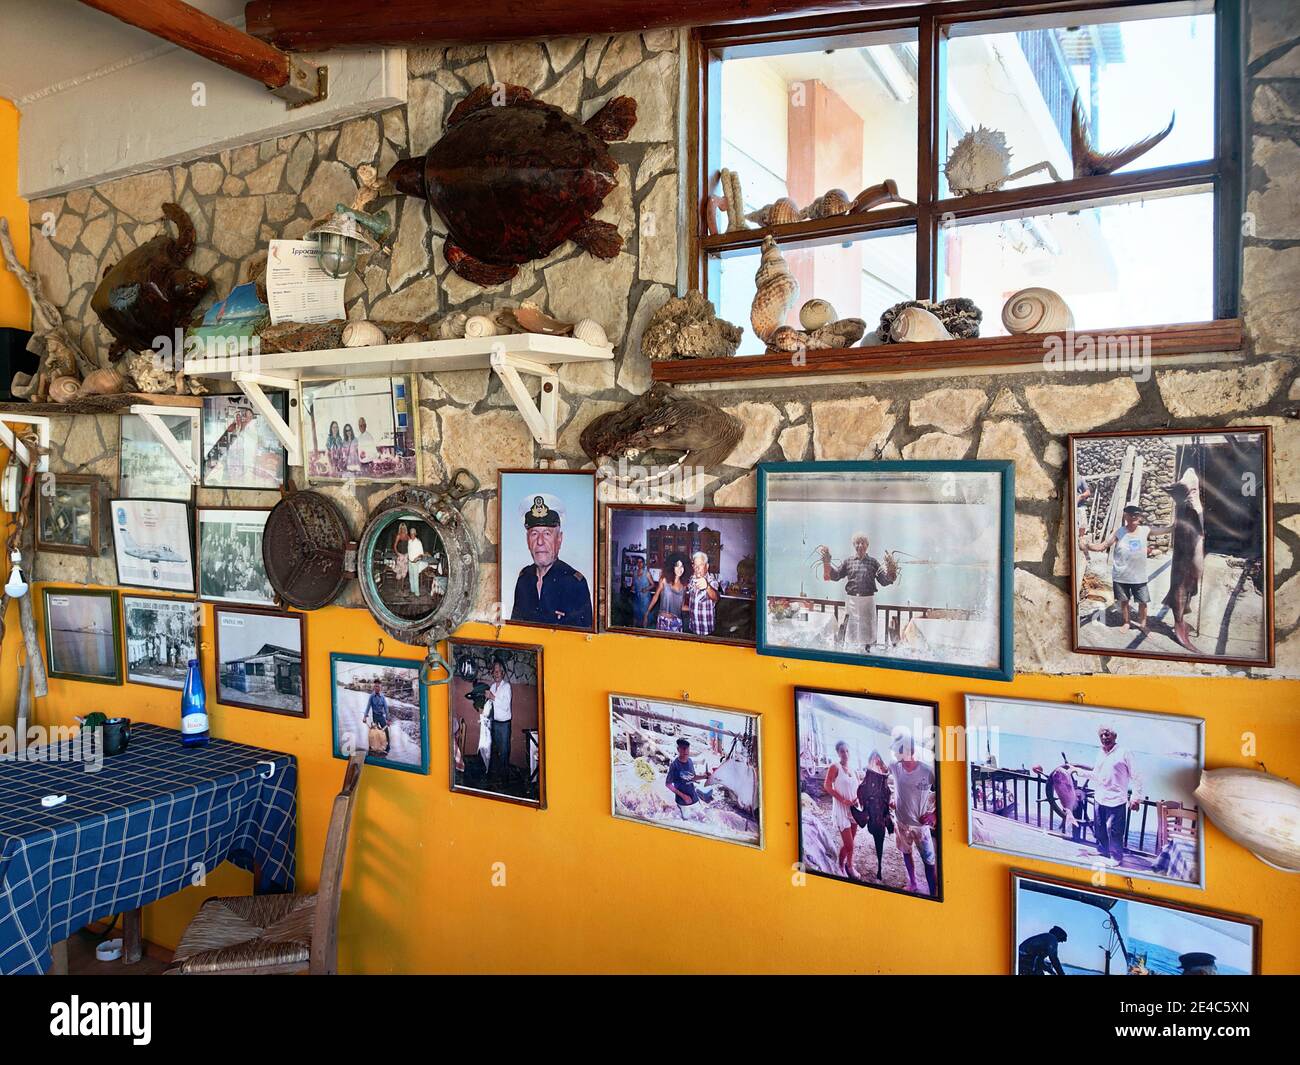 Memories and trophies of a fisherman from old times, in the fishing village of Arkoudi, Elis, Peloponnese, Greece Stock Photo